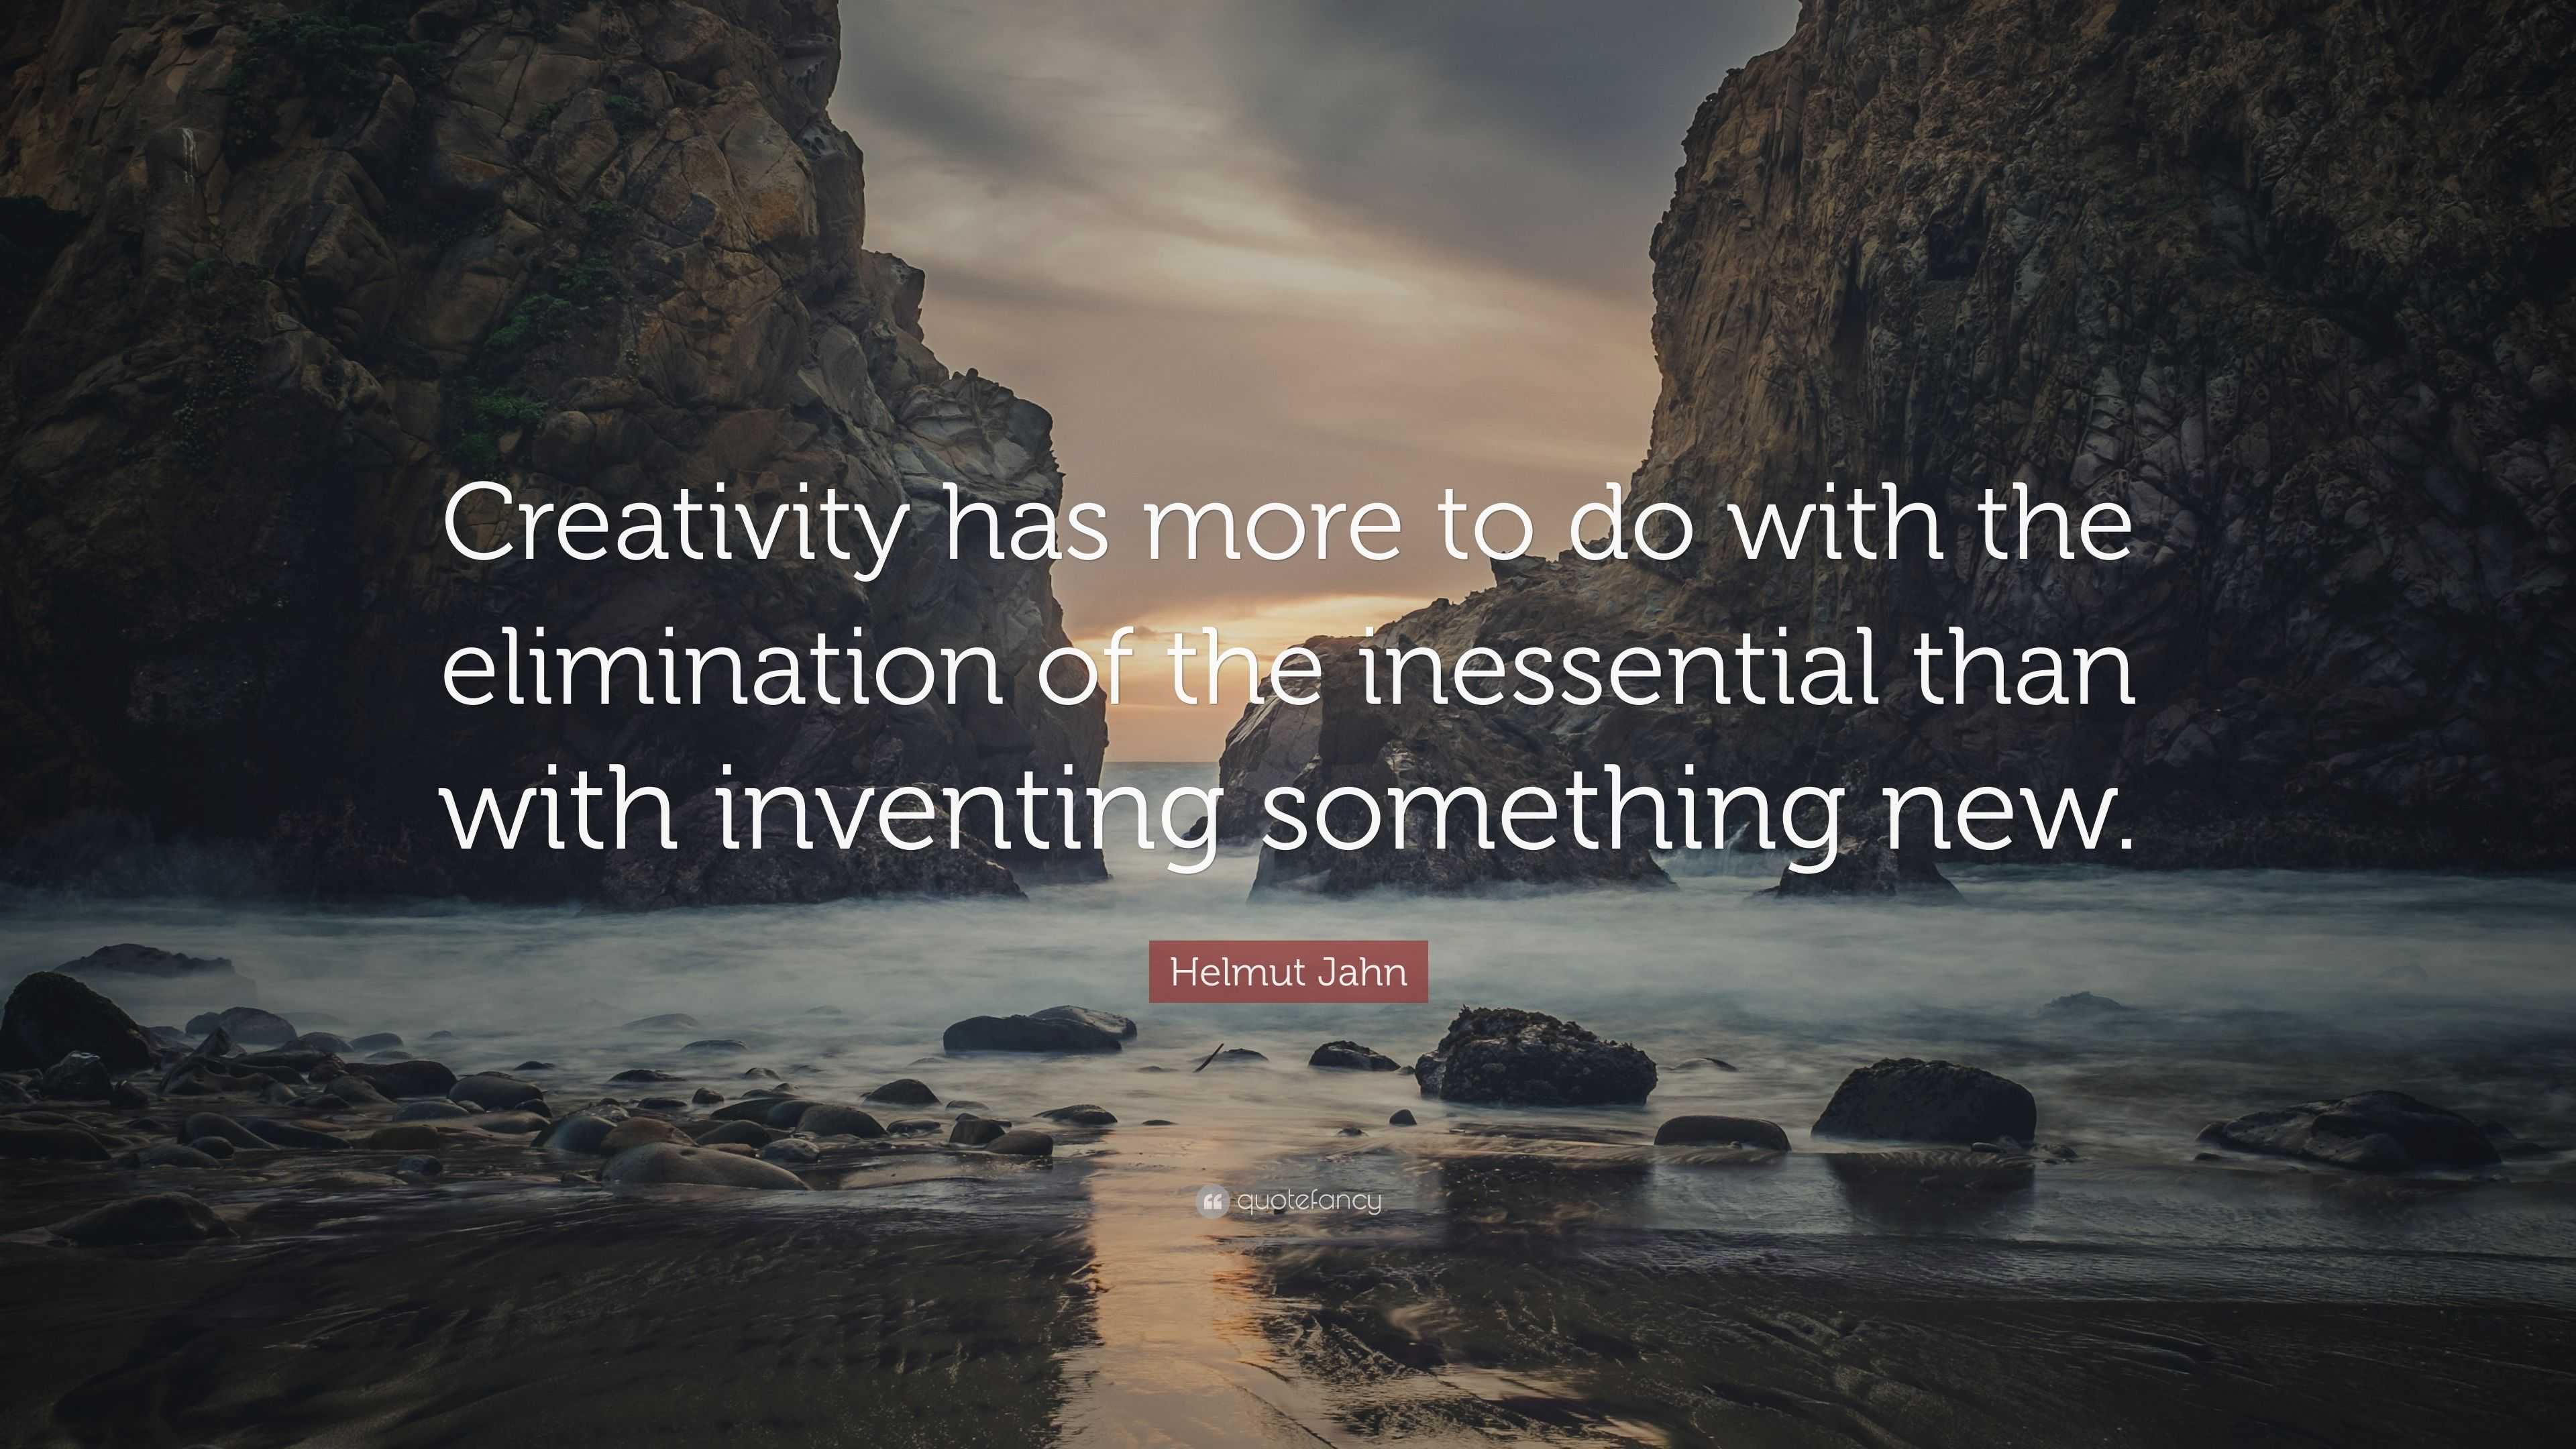 Helmut Jahn Quote: "Creativity has more to do with the ...